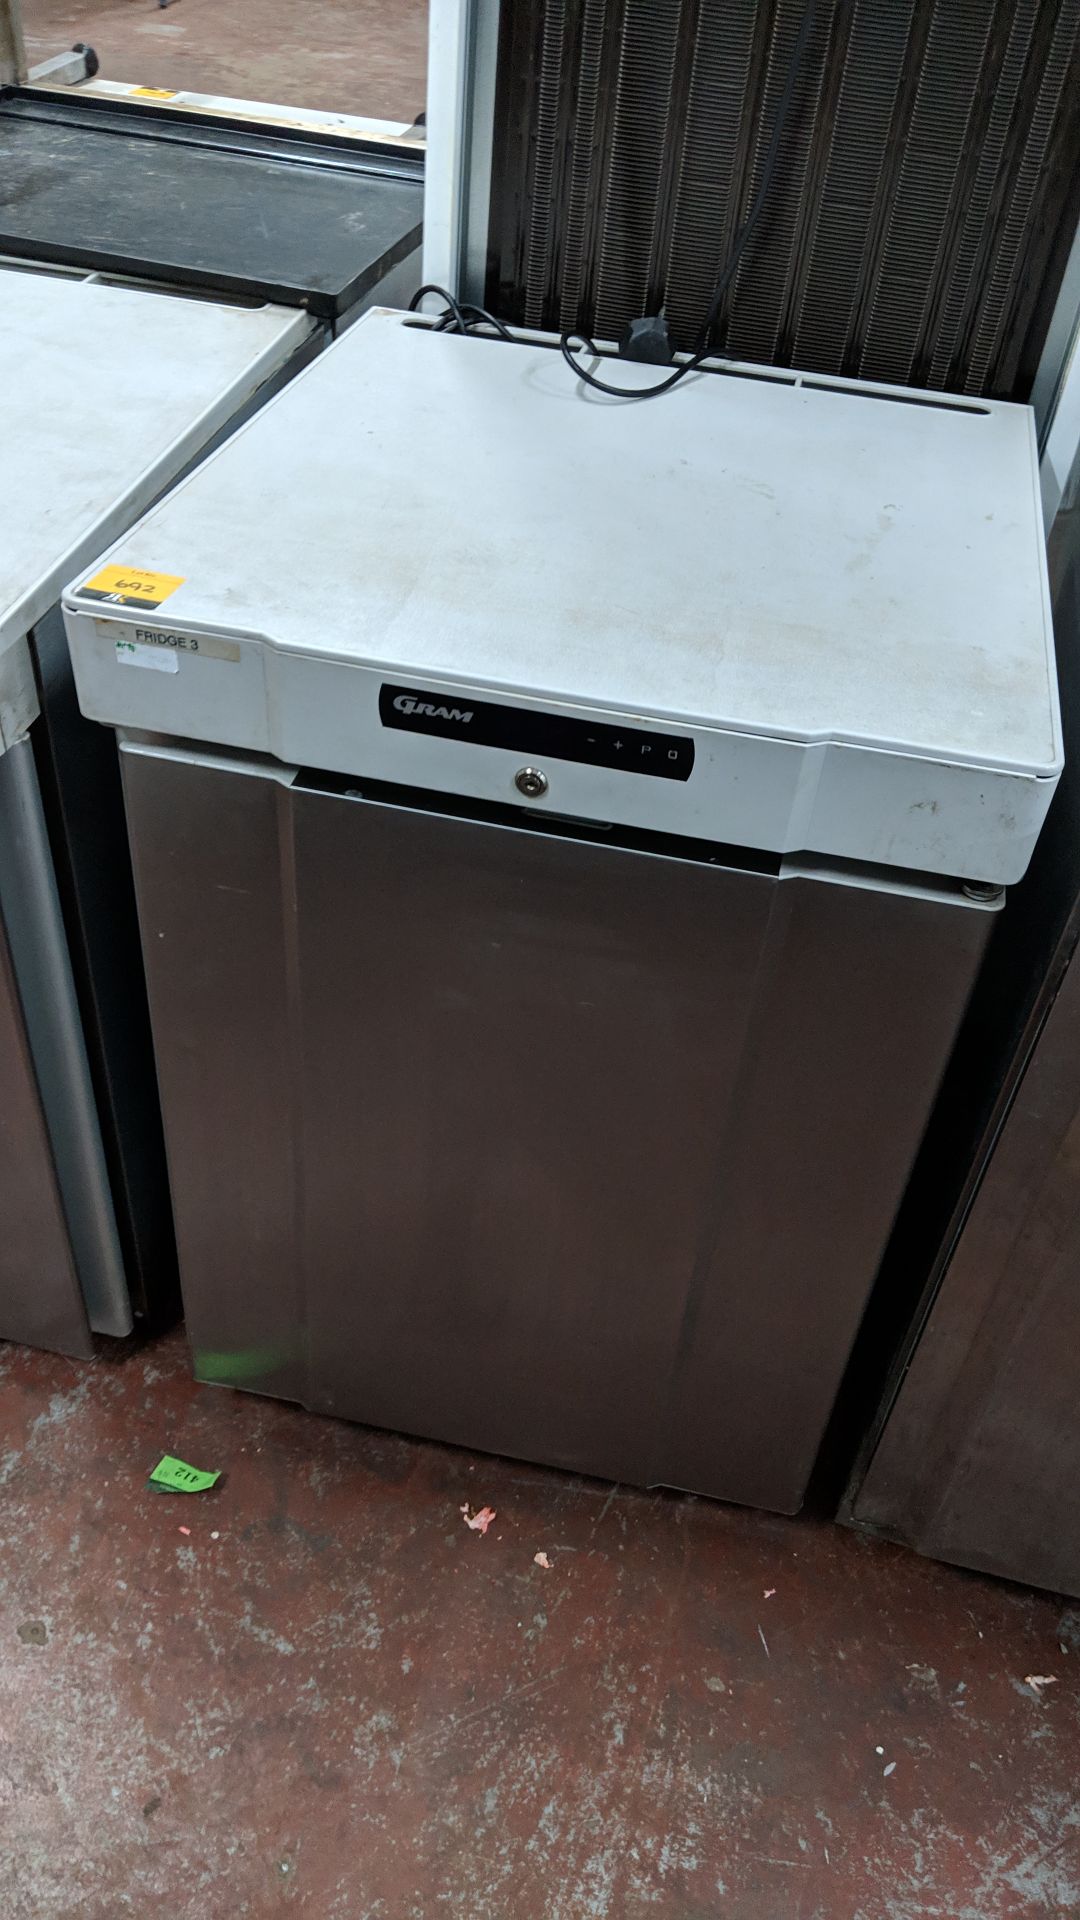 Gram stainless steel under counter fridge IMPORTANT: Please remember goods successfully bid upon - Image 2 of 4